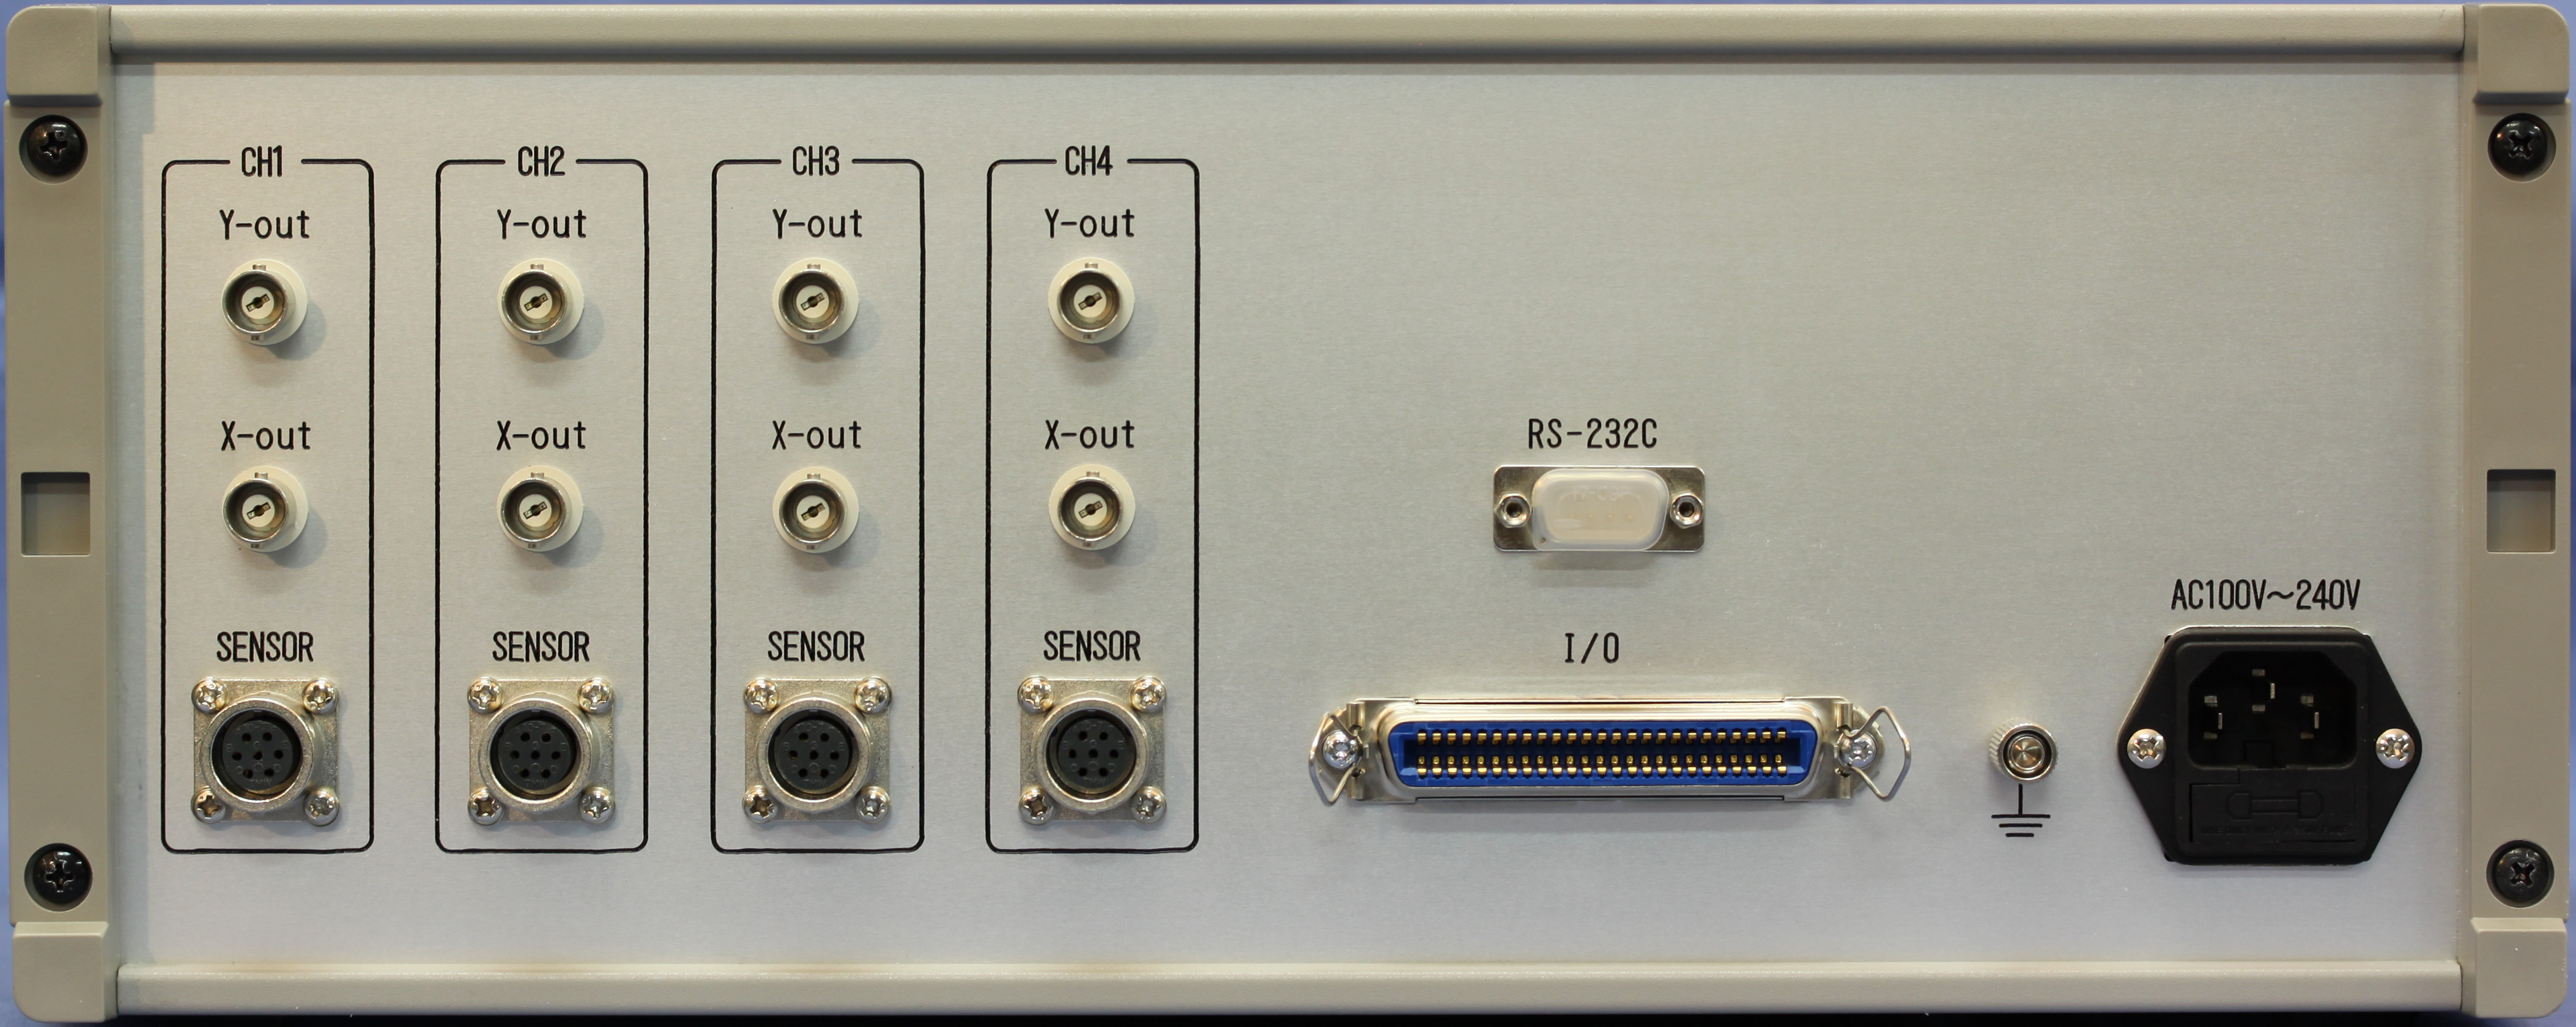 Complete with analog outputs and a control I/O port for each of the four channels